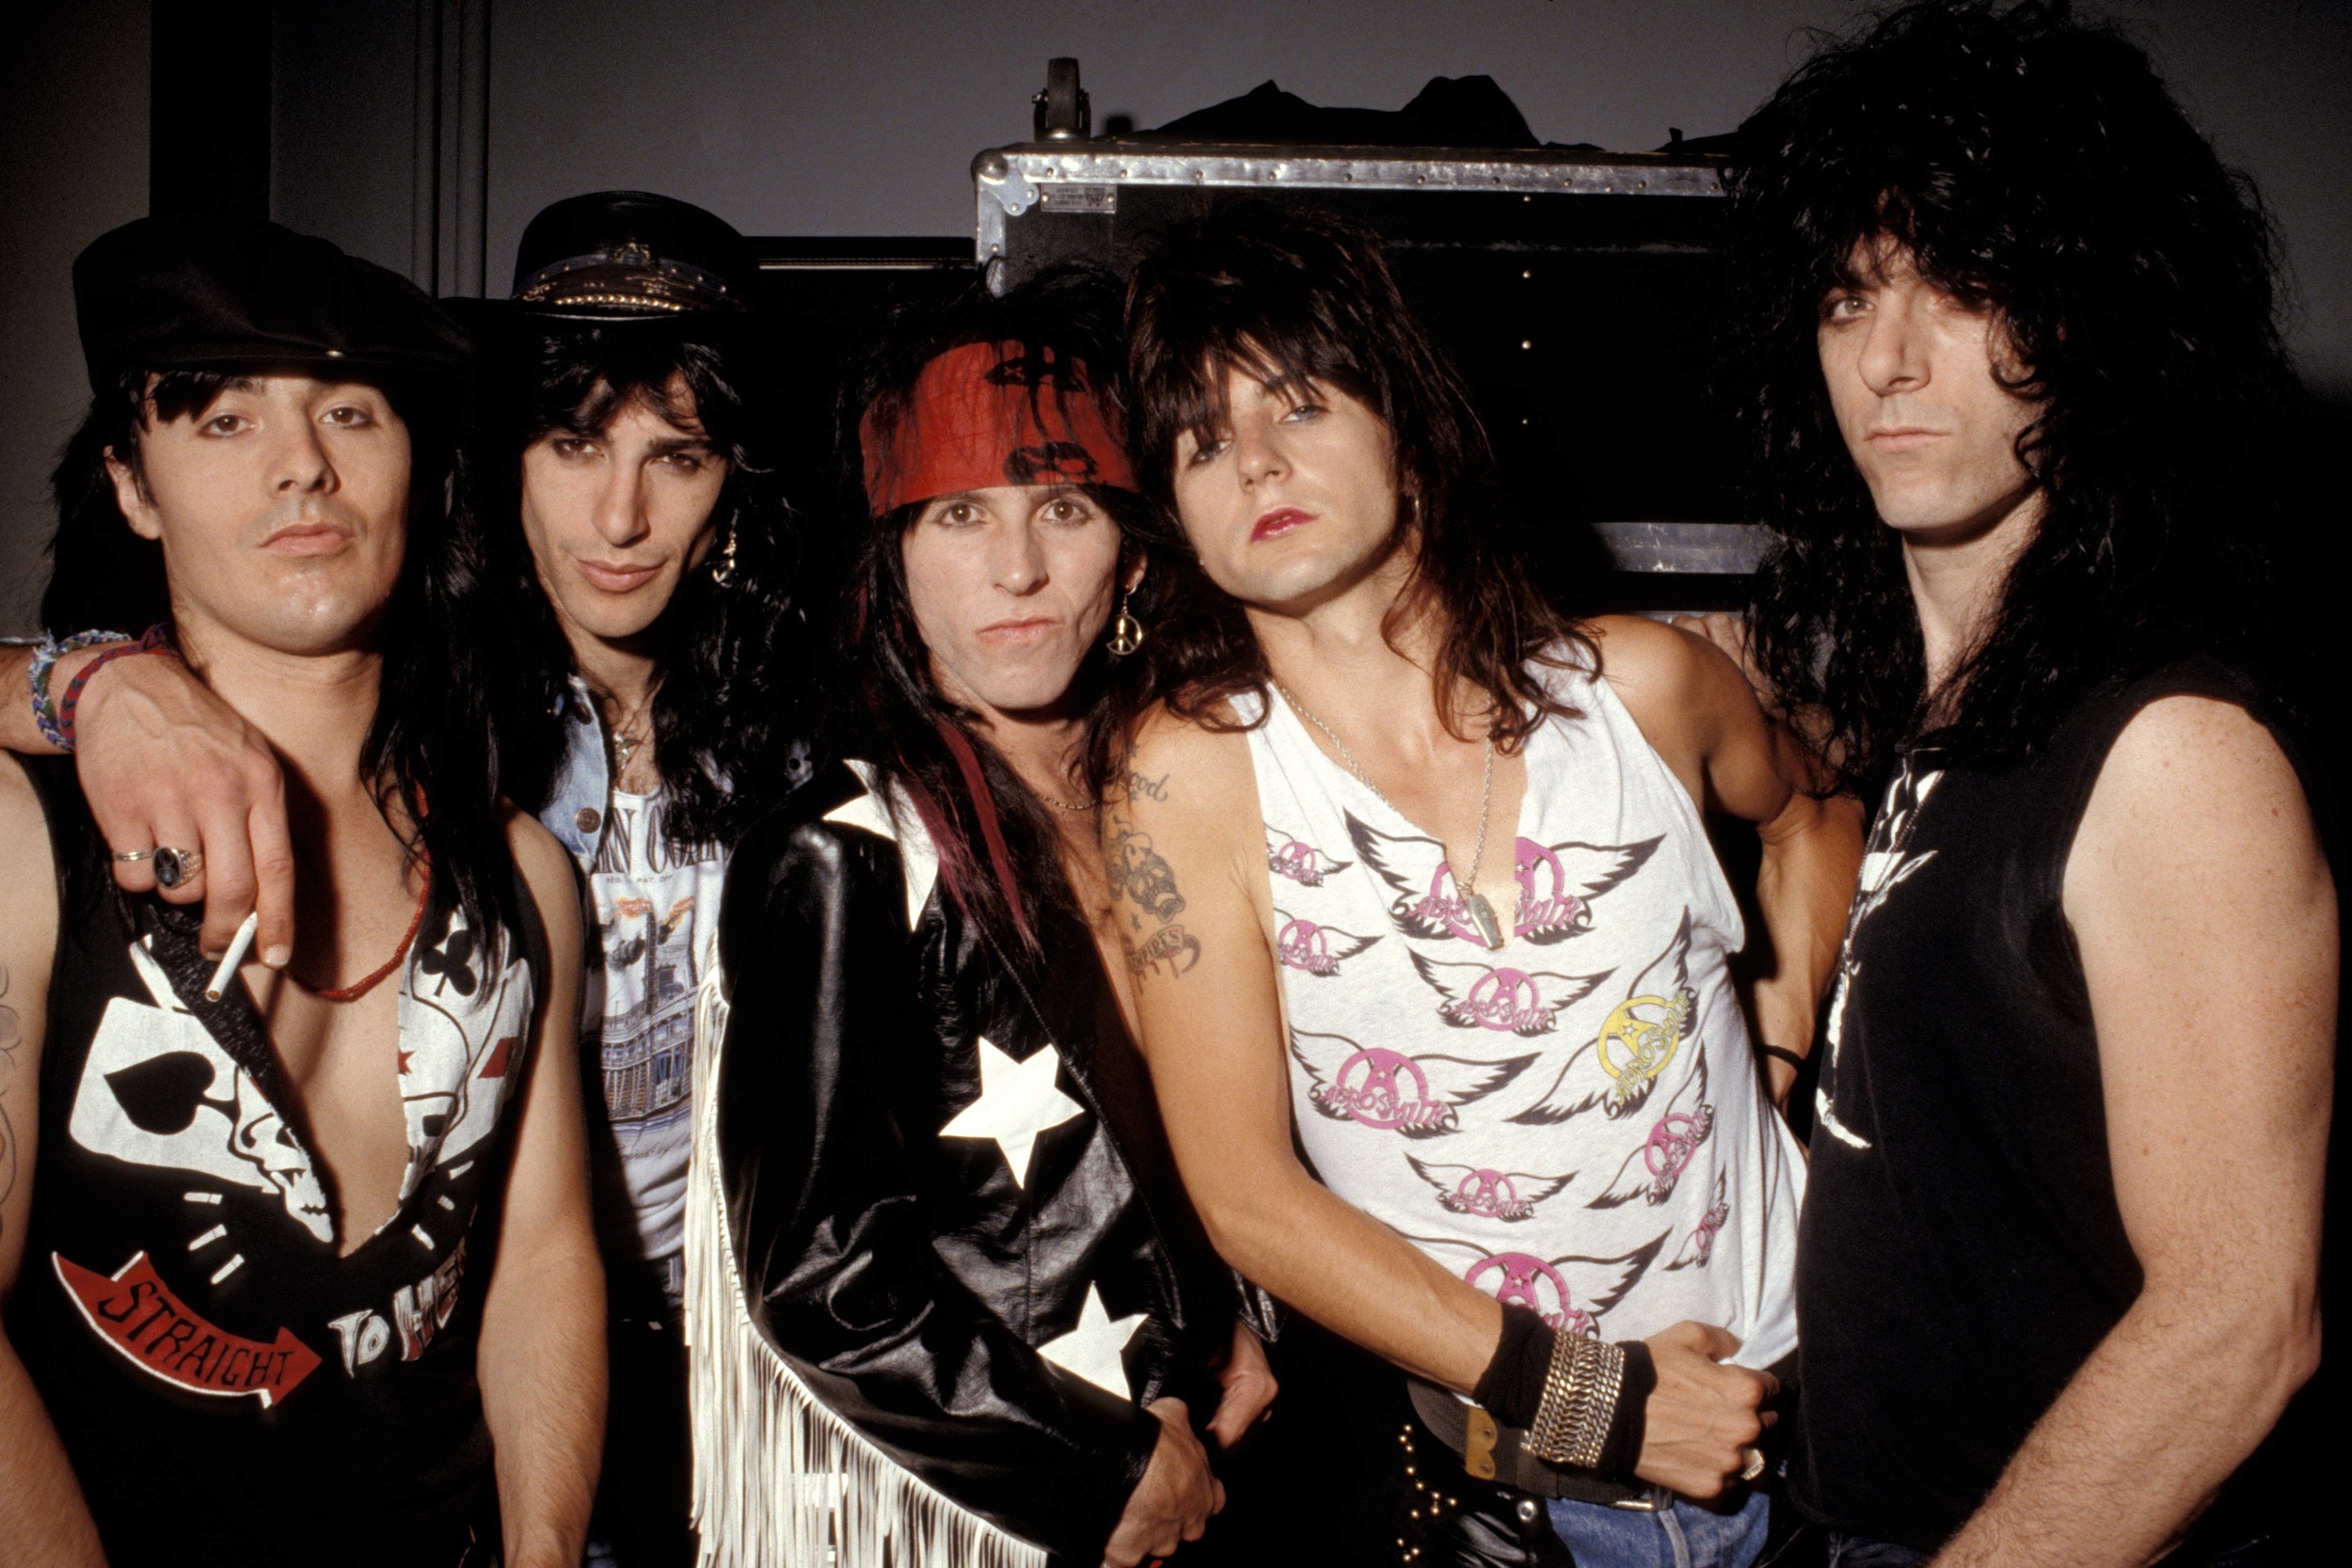 <p>L.A. Guns has quite the history. Originally co-founded by longtime guitarist Tracii Guns, the project was ultimately put on hold when Guns and bandmates Ole Beich and Rob Gardner joined up with two L.A. transplants from Indiana, Axl Rose, and Izzy Stradlin, to form Guns N' Roses. Guns, however, couldn't get along with Rose and split. L.A. Guns was revived and enjoyed some decent success in the 1980s and continued playing shows in various formations well after. <a href="https://www.youtube.com/watch?v=qmYt0e88ANo" rel="noopener noreferrer"><em>Cocked & Loaded </em>(1989)</a> is arguably the band's most commercially successful effort.</p><p><a href='https://www.msn.com/en-us/community/channel/vid-cj9pqbr0vn9in2b6ddcd8sfgpfq6x6utp44fssrv6mc2gtybw0us'>Follow us on MSN to see more of our exclusive entertainment content.</a></p>